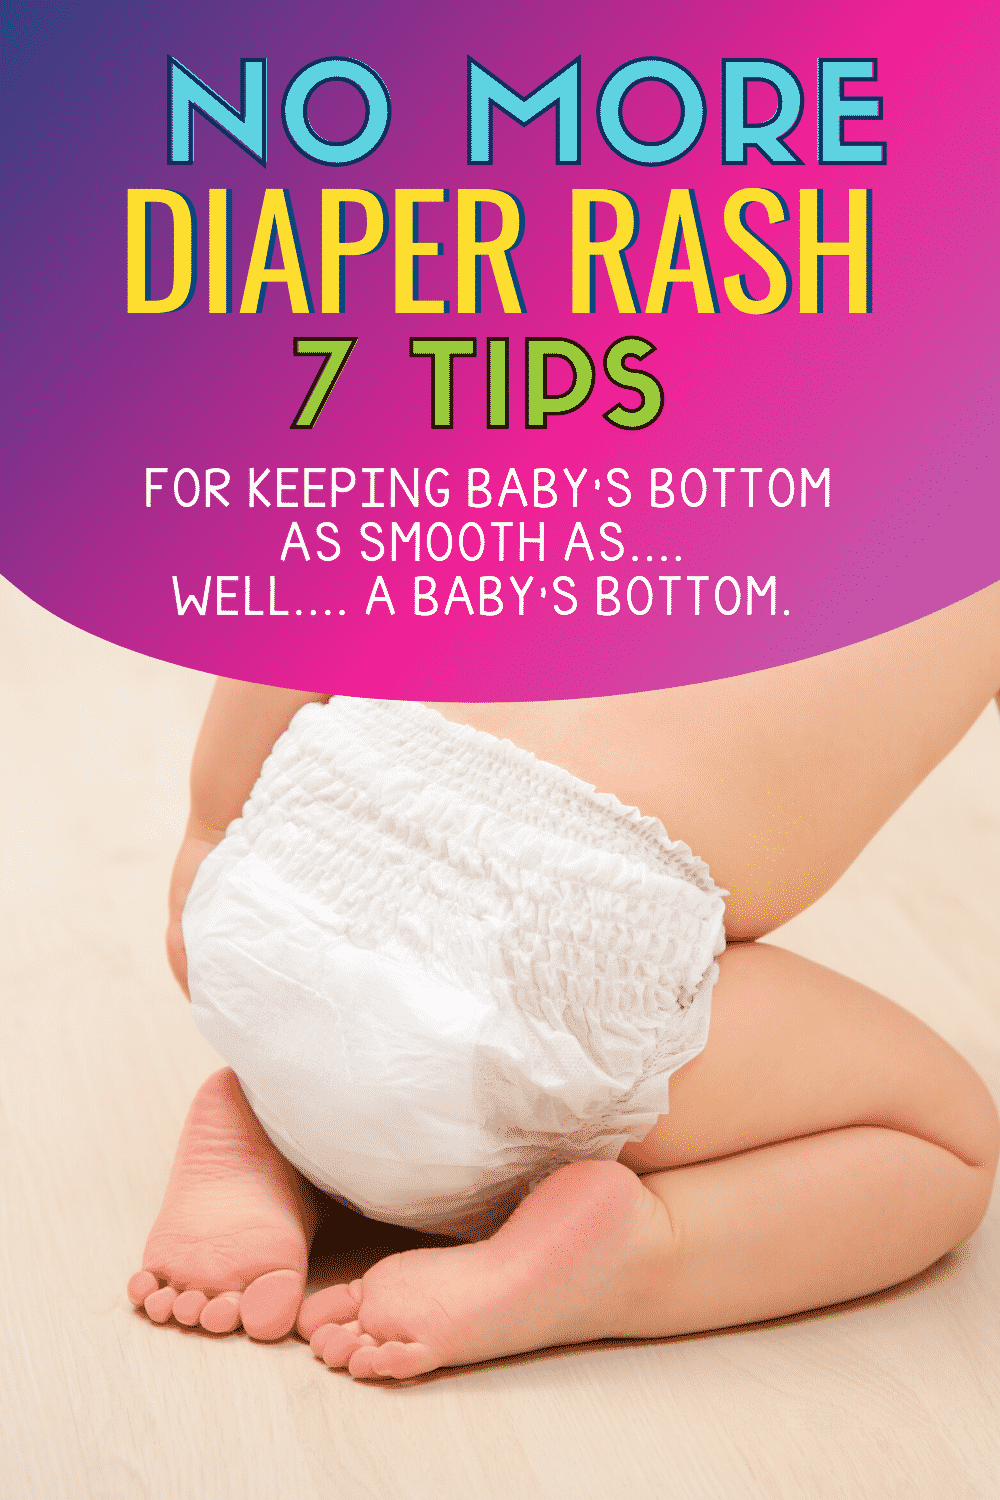 Treat and Prevent Diaper Rash with a few easy tips,